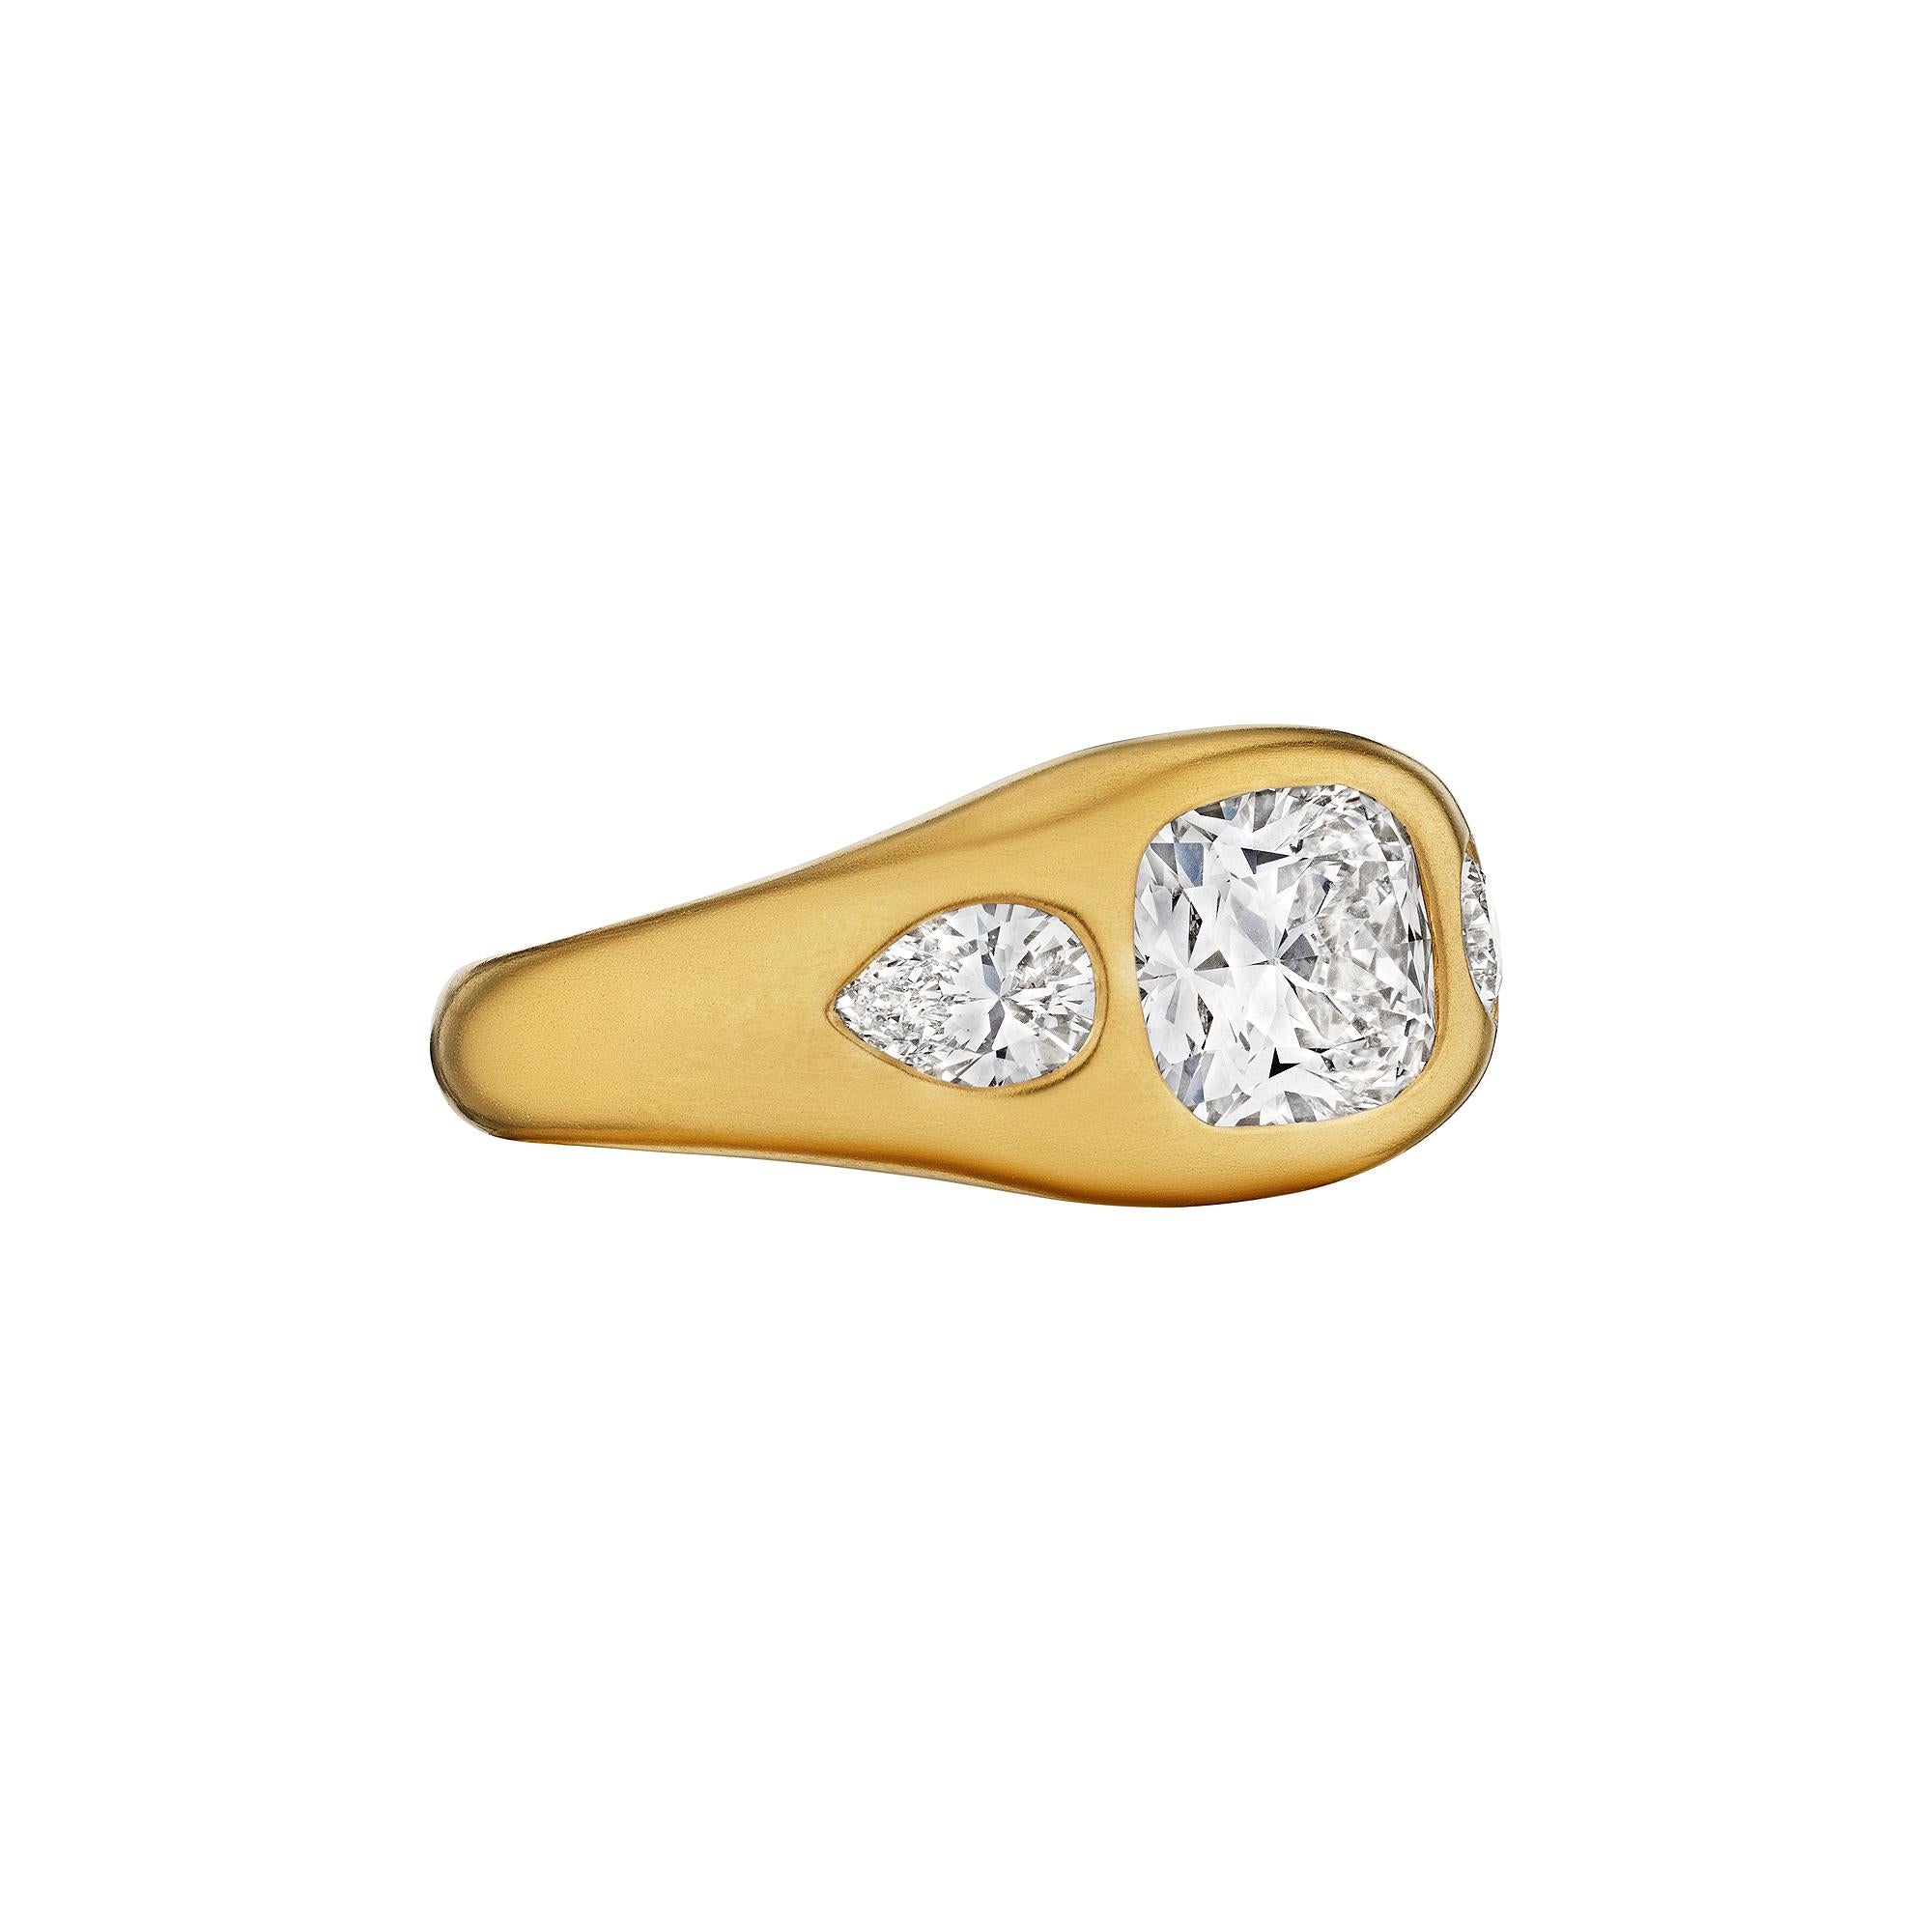 Both soulful and sultry, this 1.79-carat cushion brilliant cut diamond and 18 karat yellow gold burnished set ring, with a chic matte finish, is uncompromising.  Handmade by Steven Fox Jewelry, the center cushion diamond sports two pear shape side